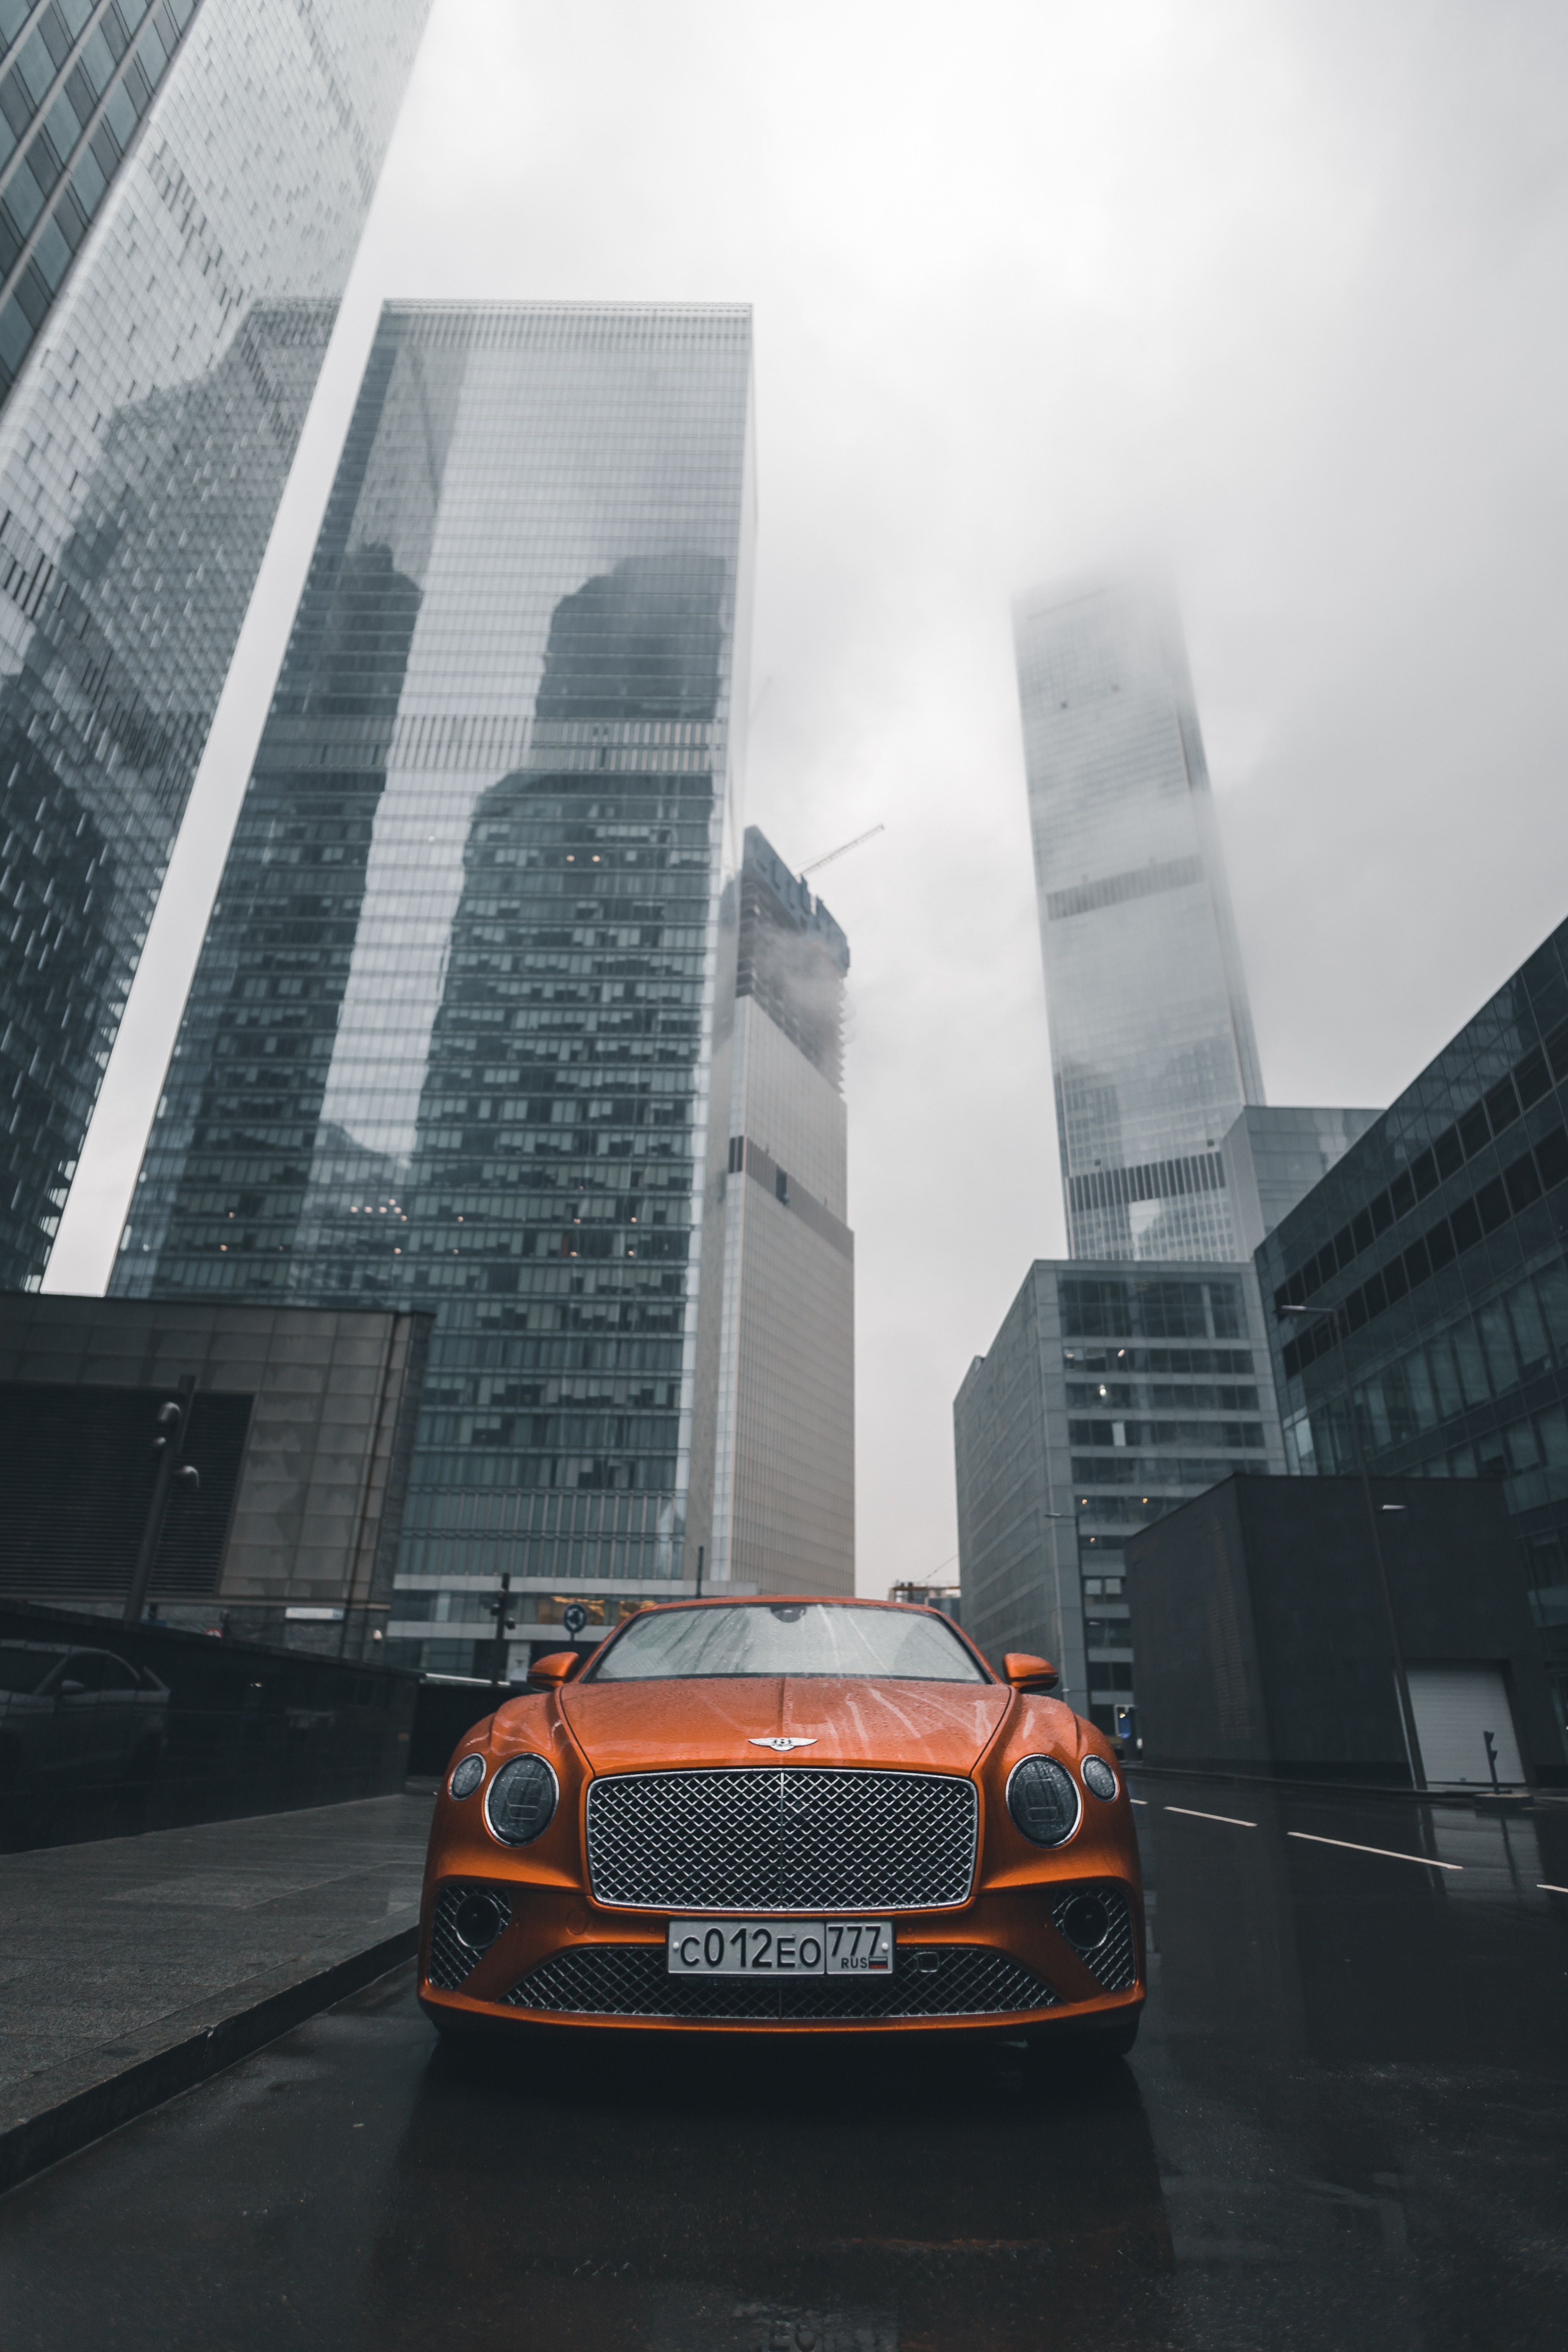 52580 Screensavers and Wallpapers Bentley for phone. Download bentley, cars, orange, city, building, car, front view, machine, bentley continental gt pictures for free